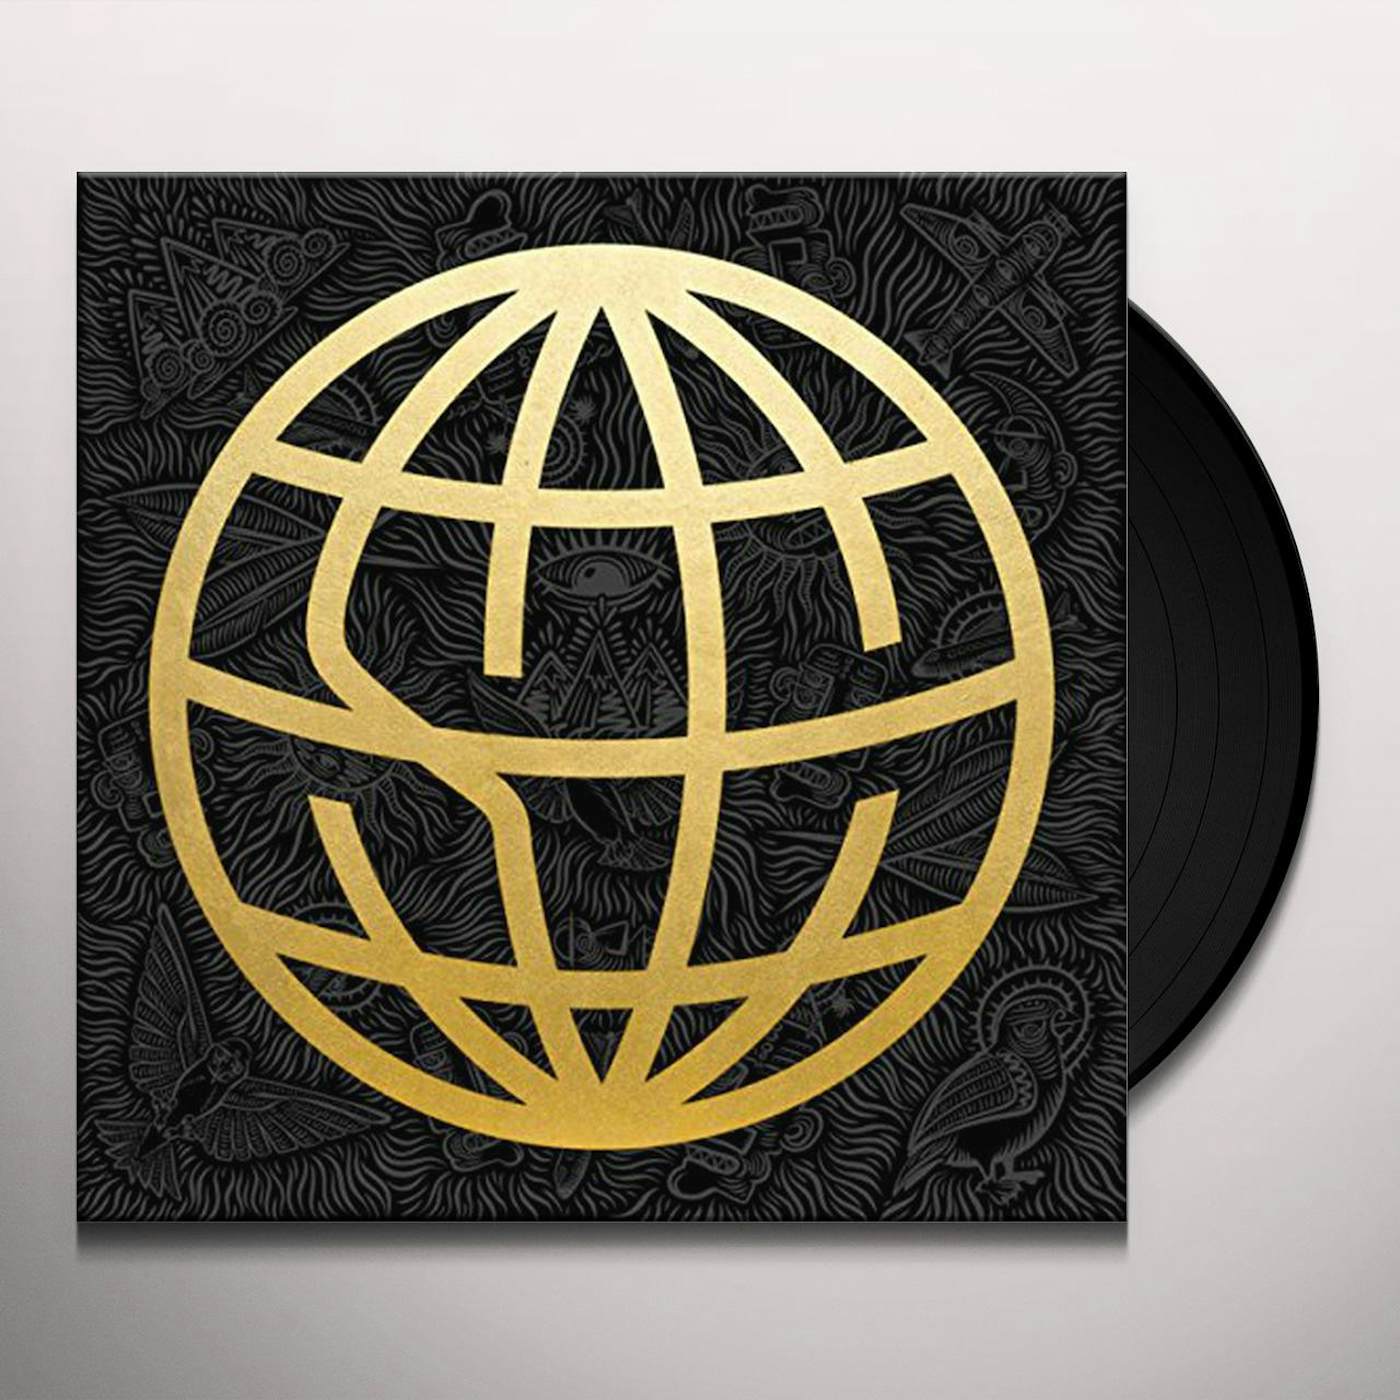 State Champs Around the World and Back Vinyl Record